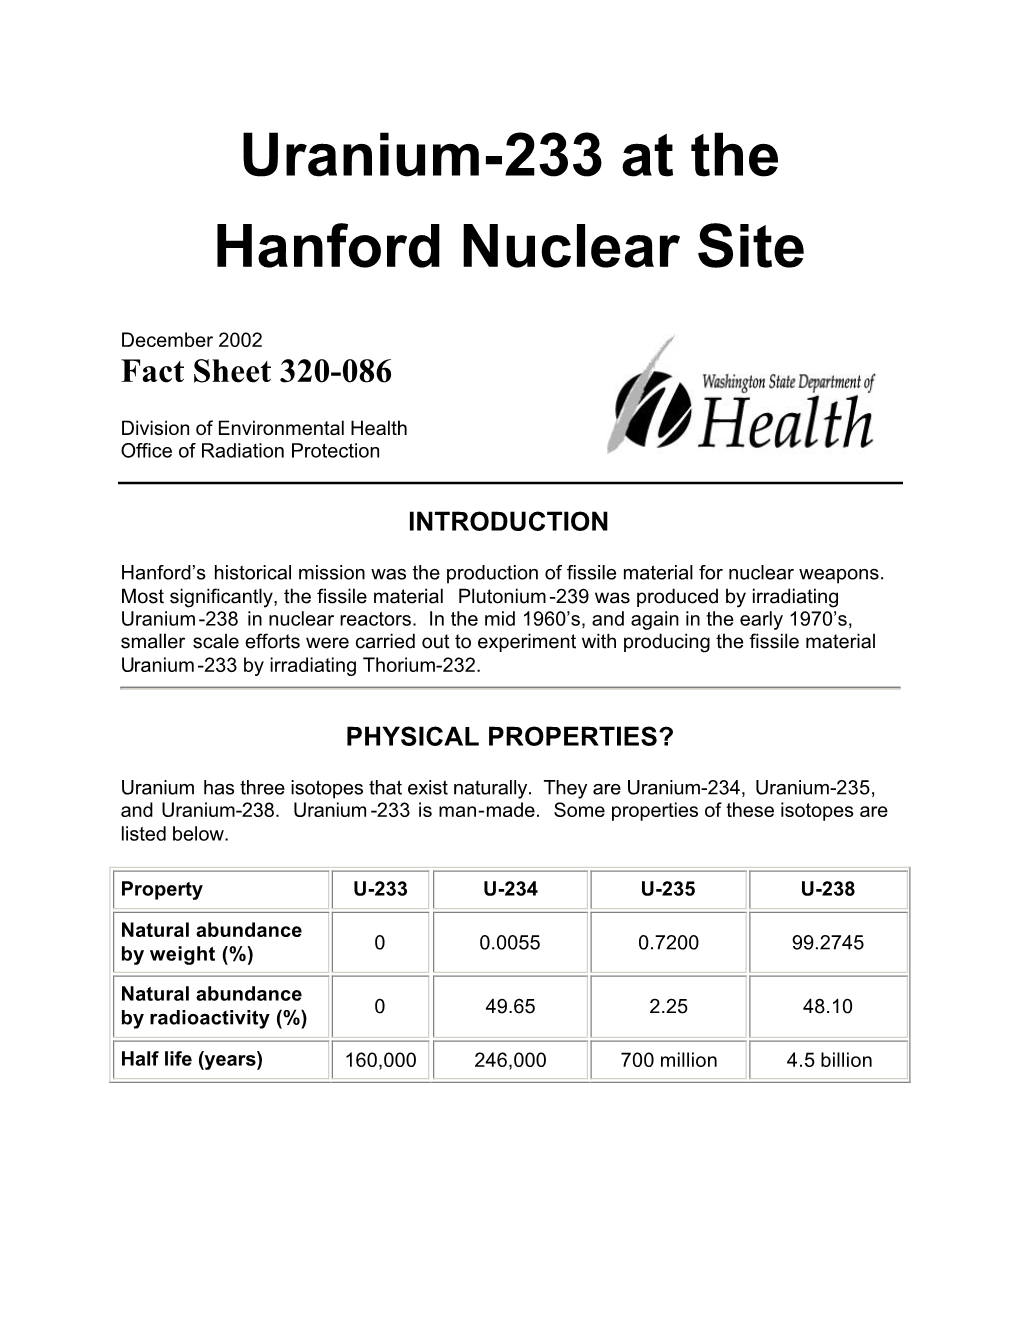 Uranium-233 at the Hanford Nuclear Site